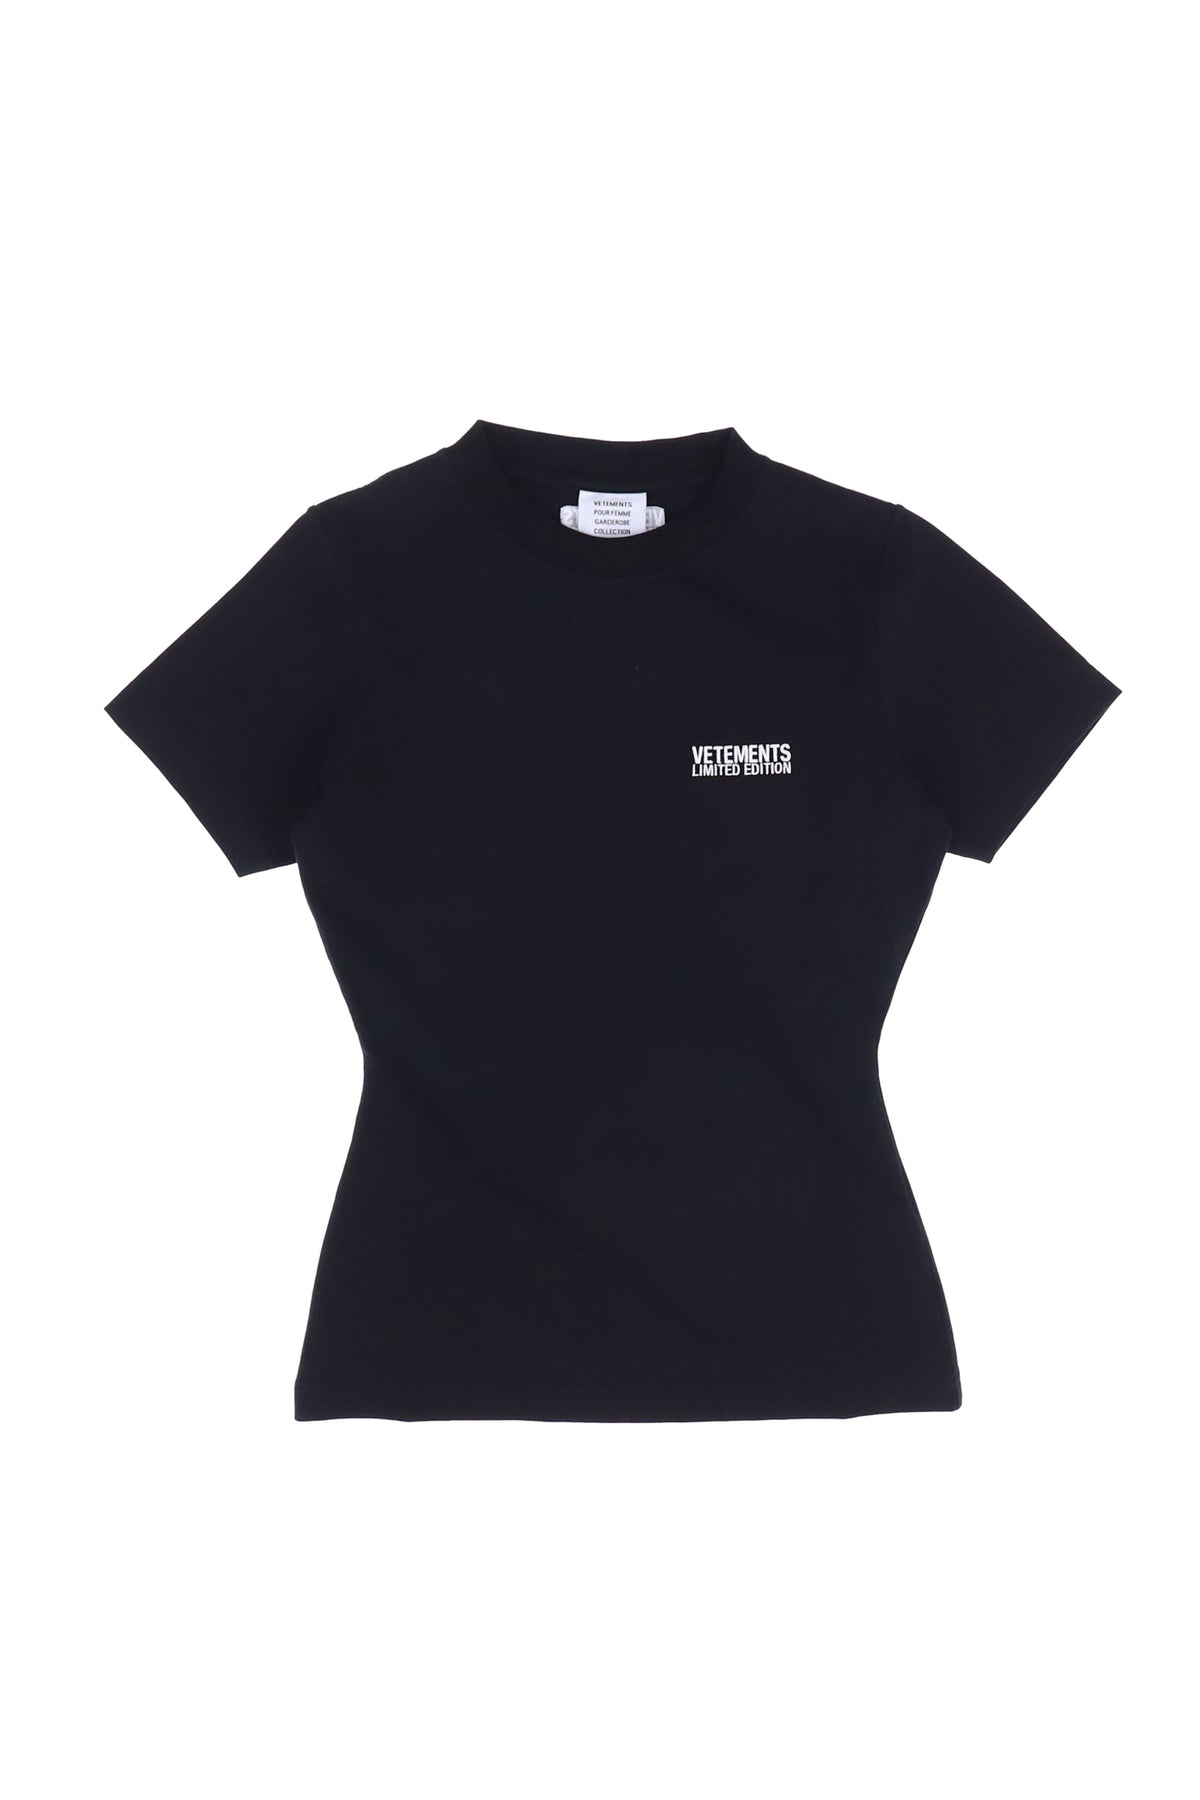 EMBROIDERED LOGO FITTED T-SHIRT / BLK